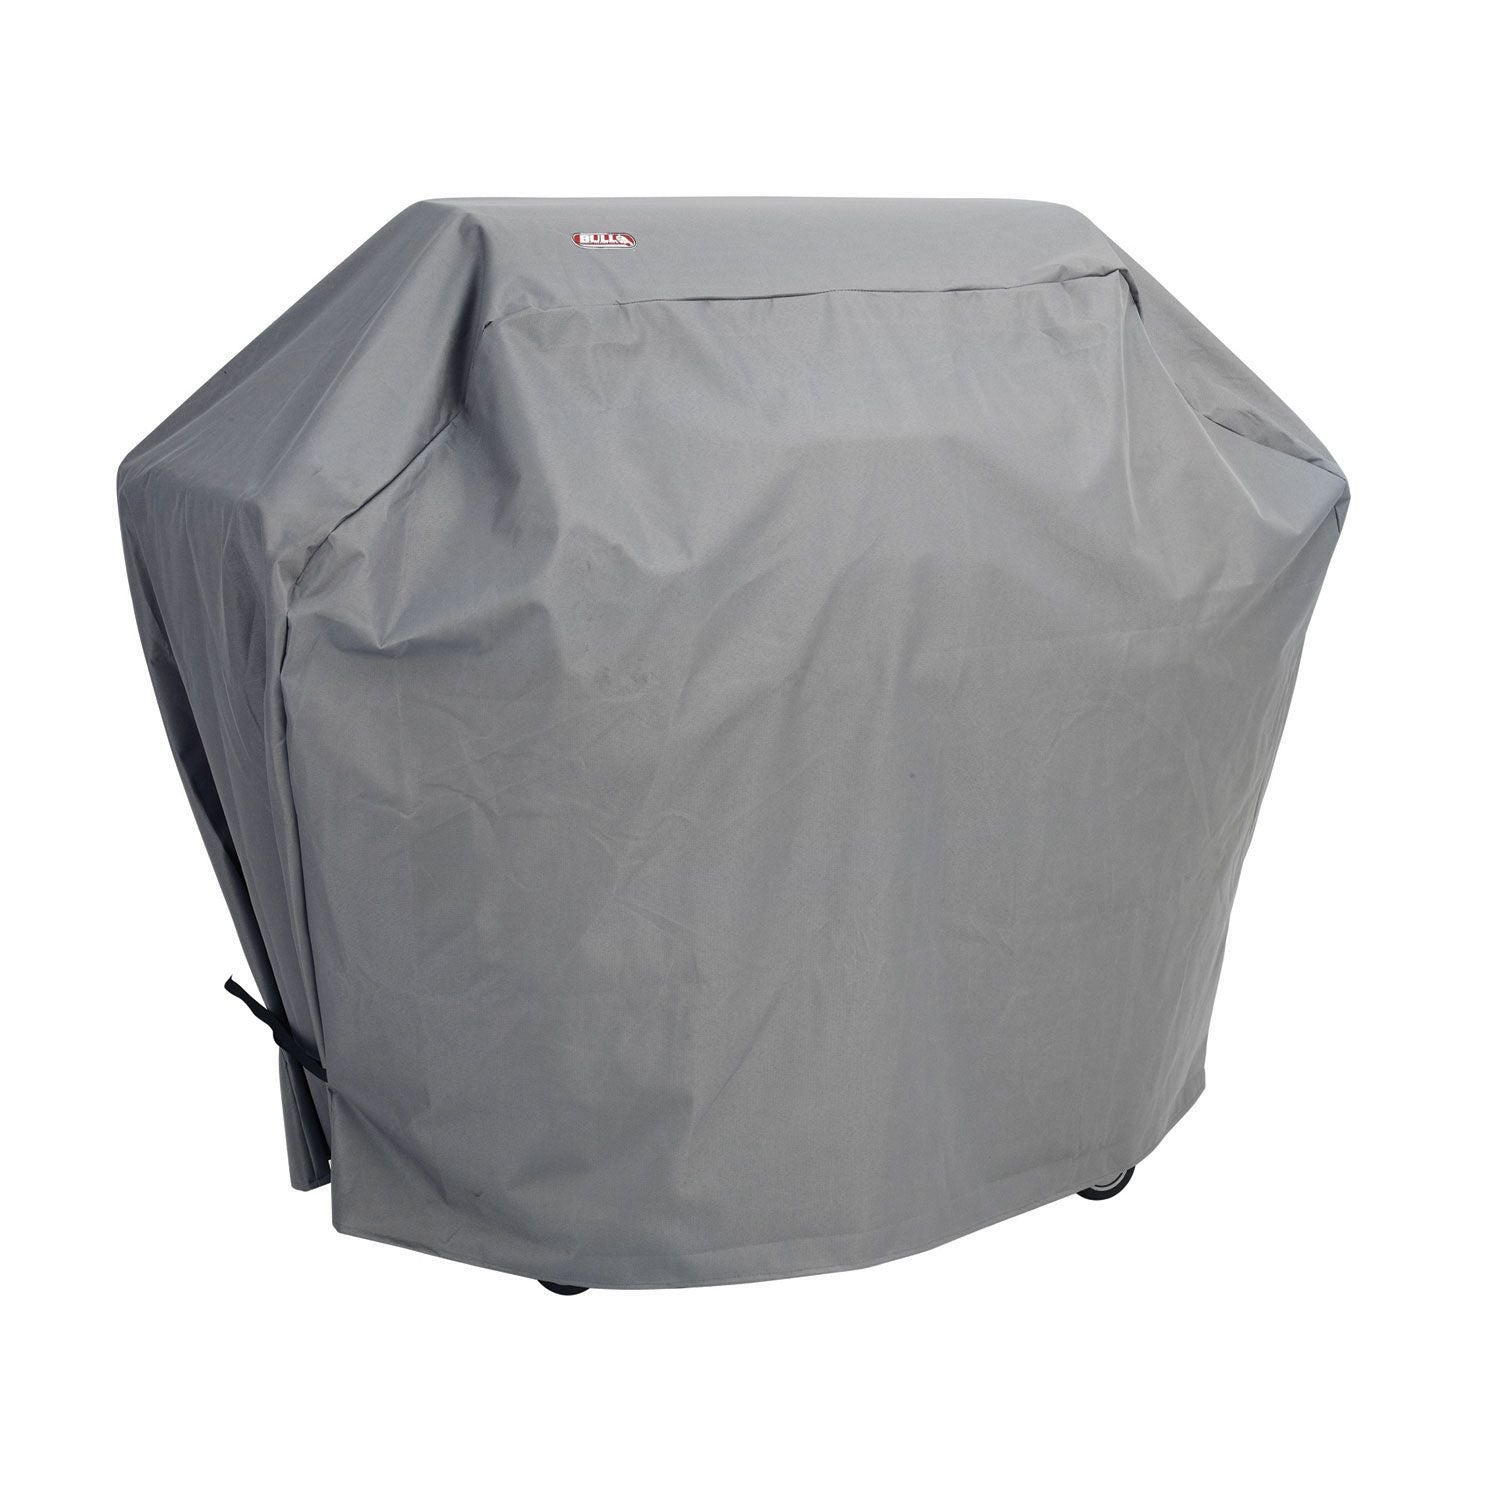 Bull Grills Bull Grills - 0-Inch Cart Cover for Lonestar Select, Angus, and Outlaw Grills- 72012